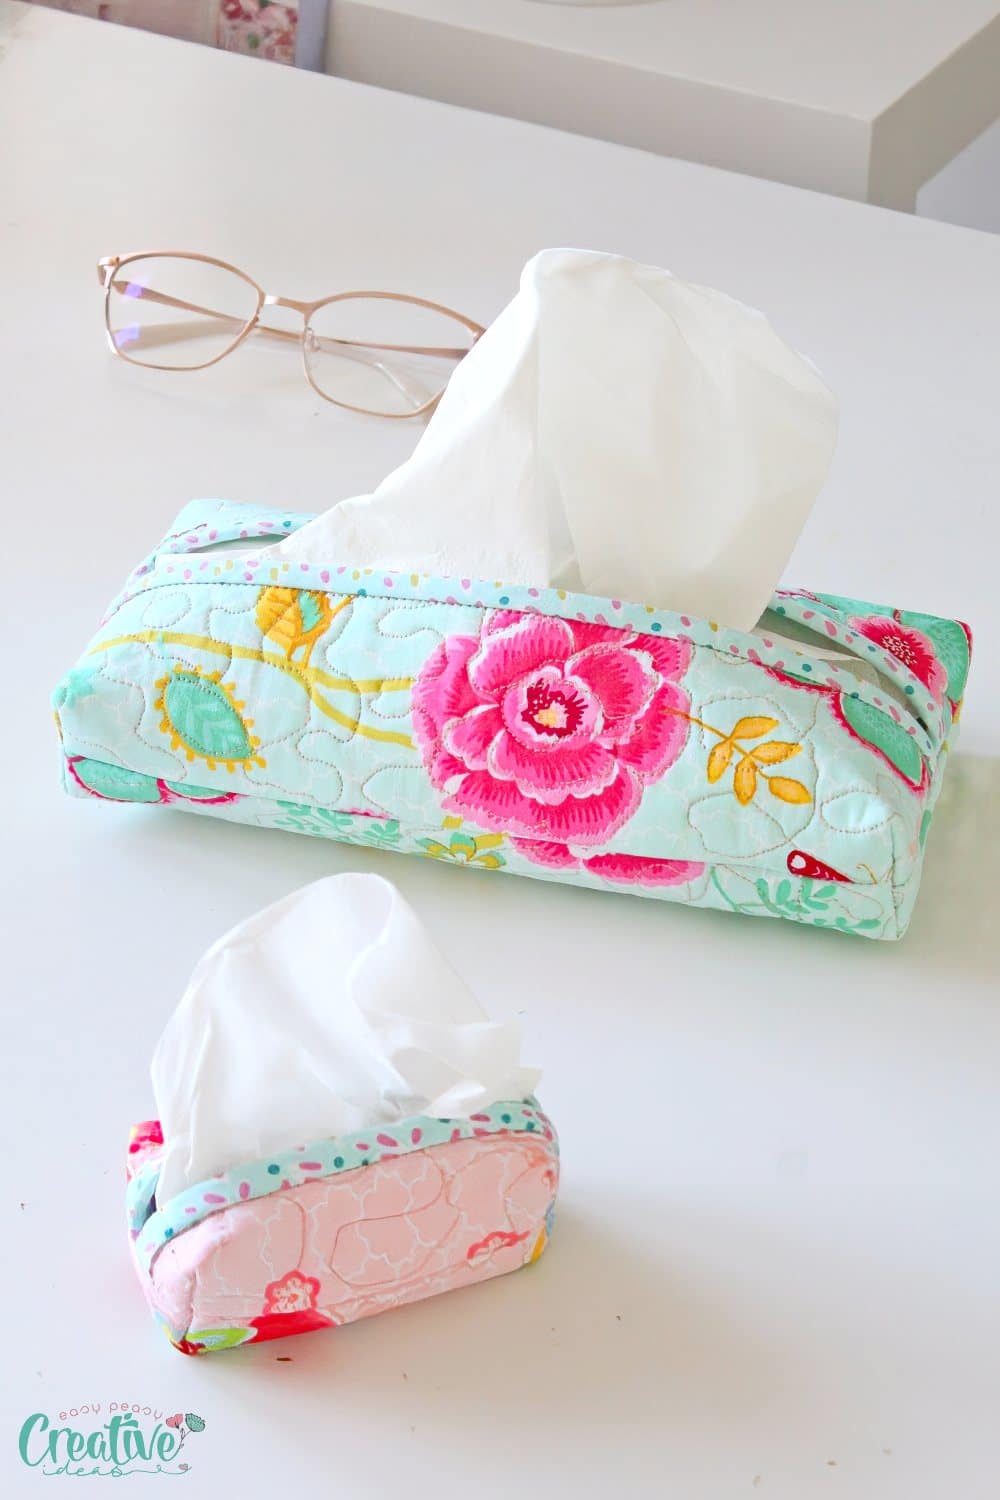 Handmade fabric tissue holder in two sizes